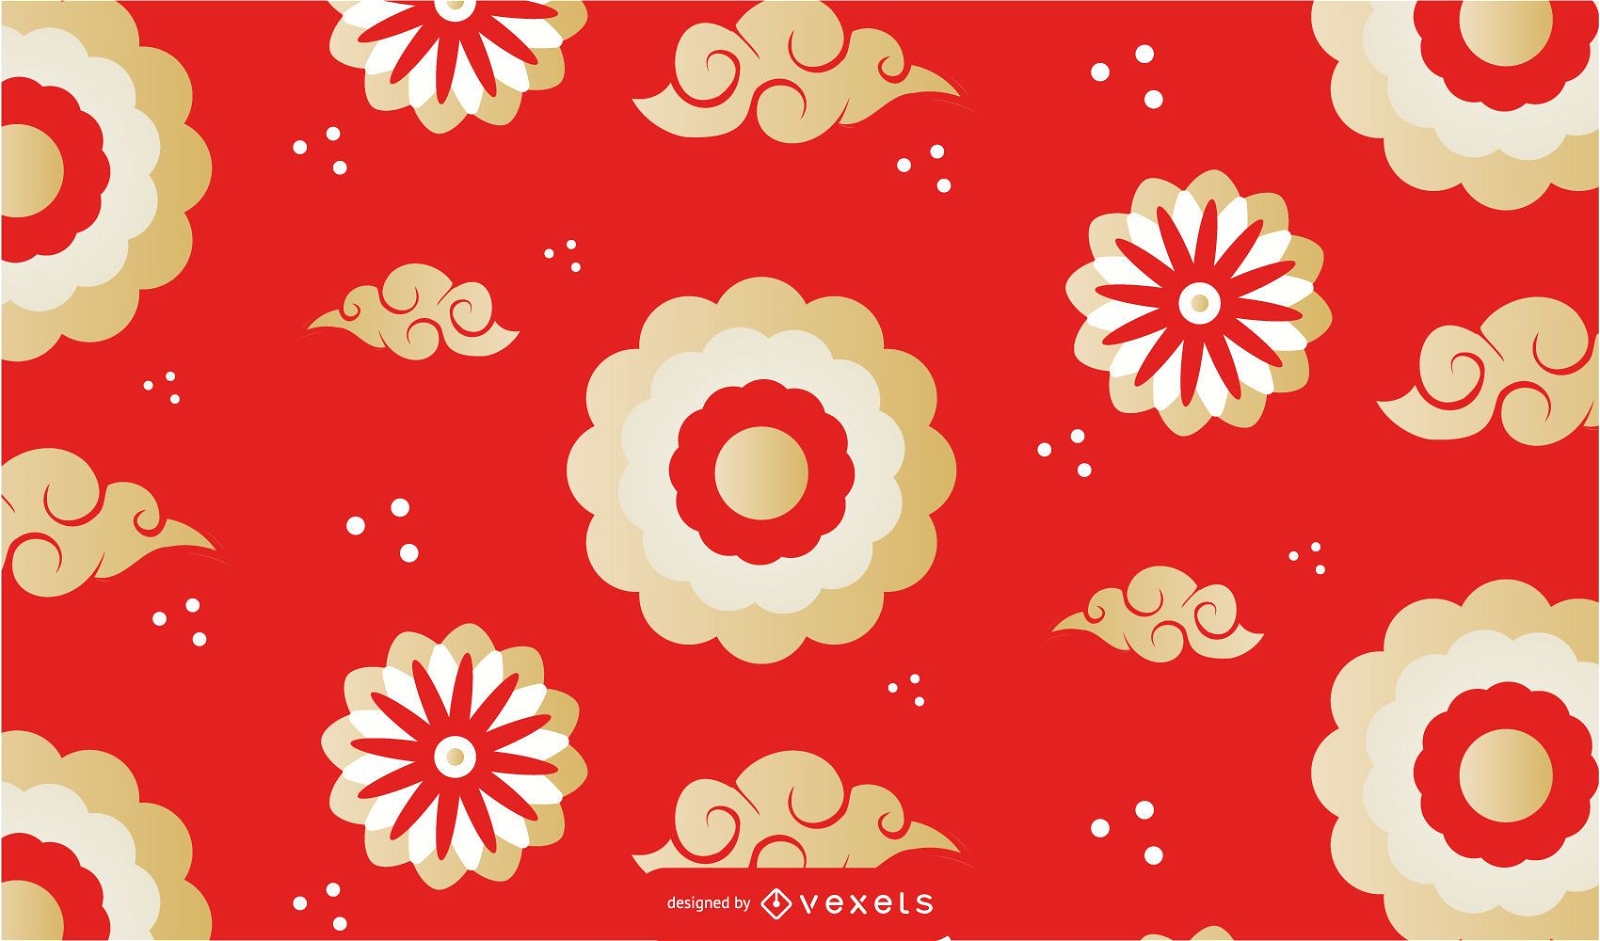 Chinese clouds flowers pattern design